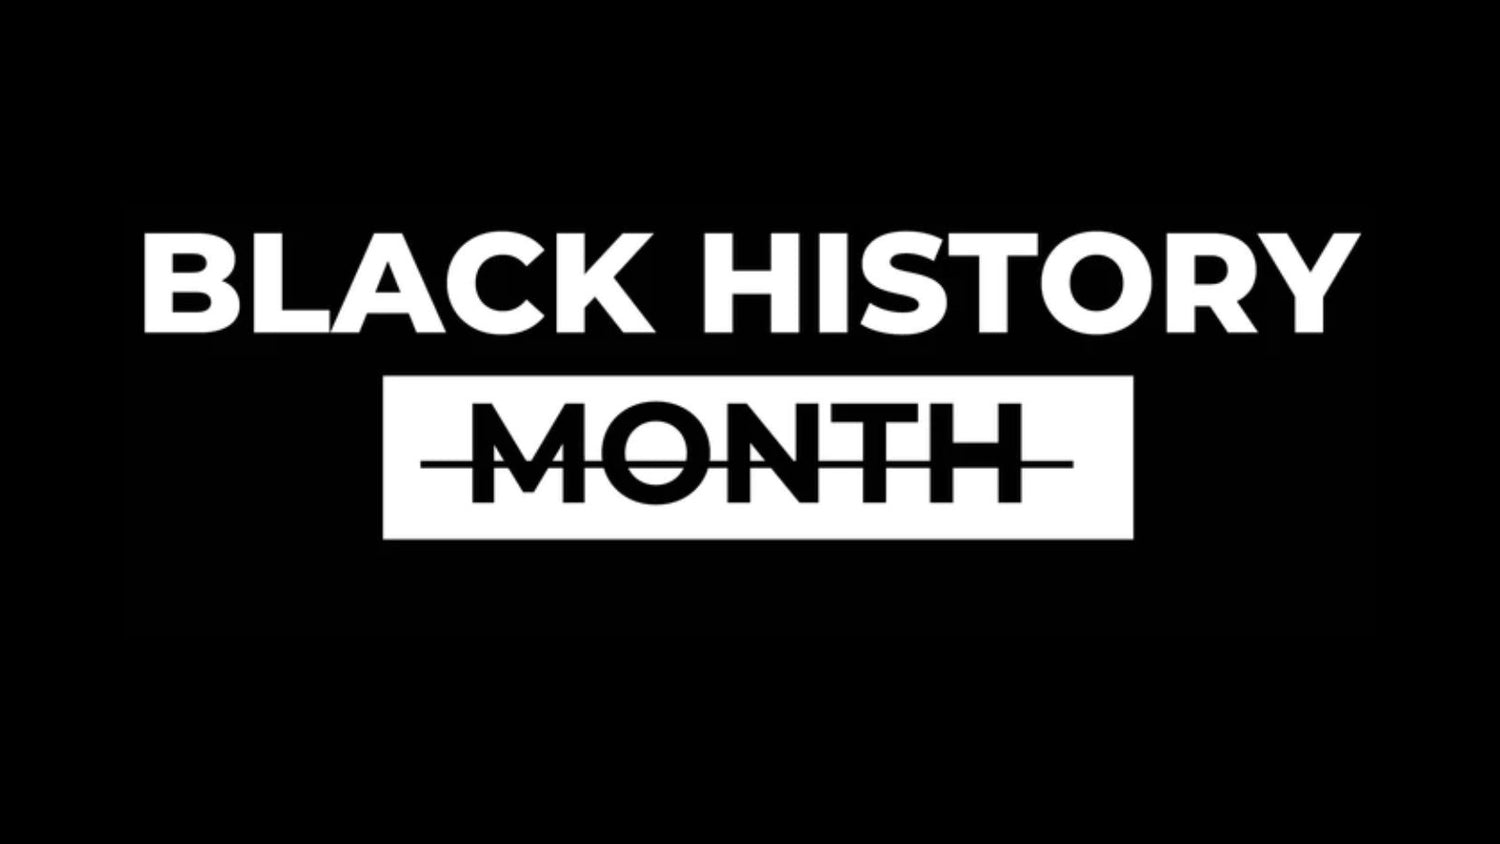 Black History Month - Black Background with Month Crossed Out